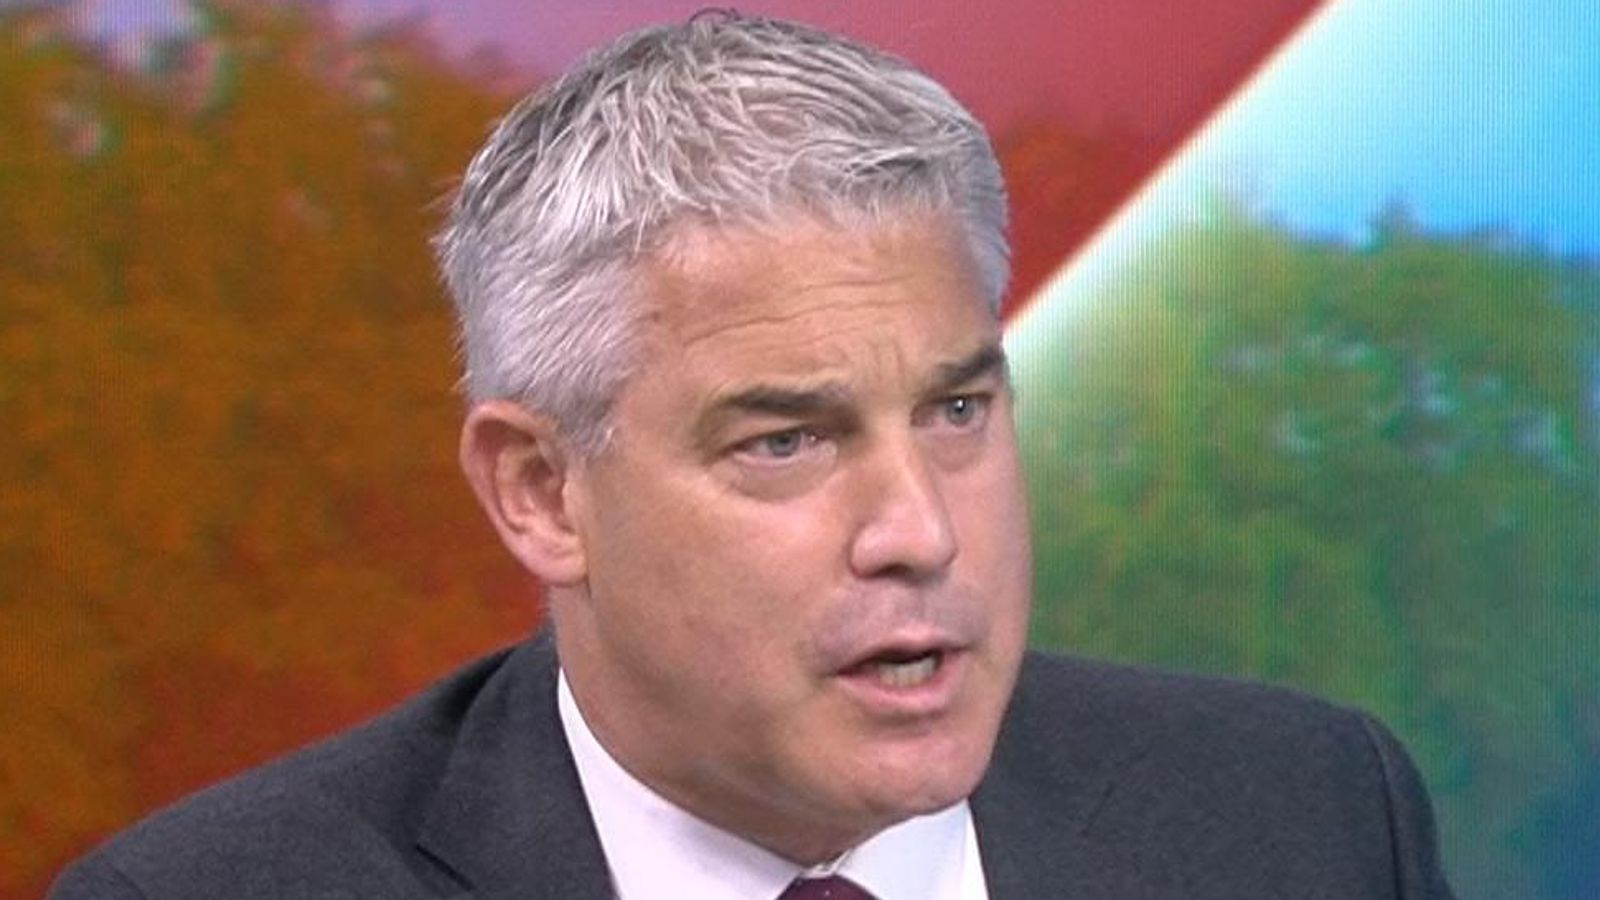 Health Secretary Steve Barclay rules out new pay offer for nurses despite 'constructive' meeting with RCN chief